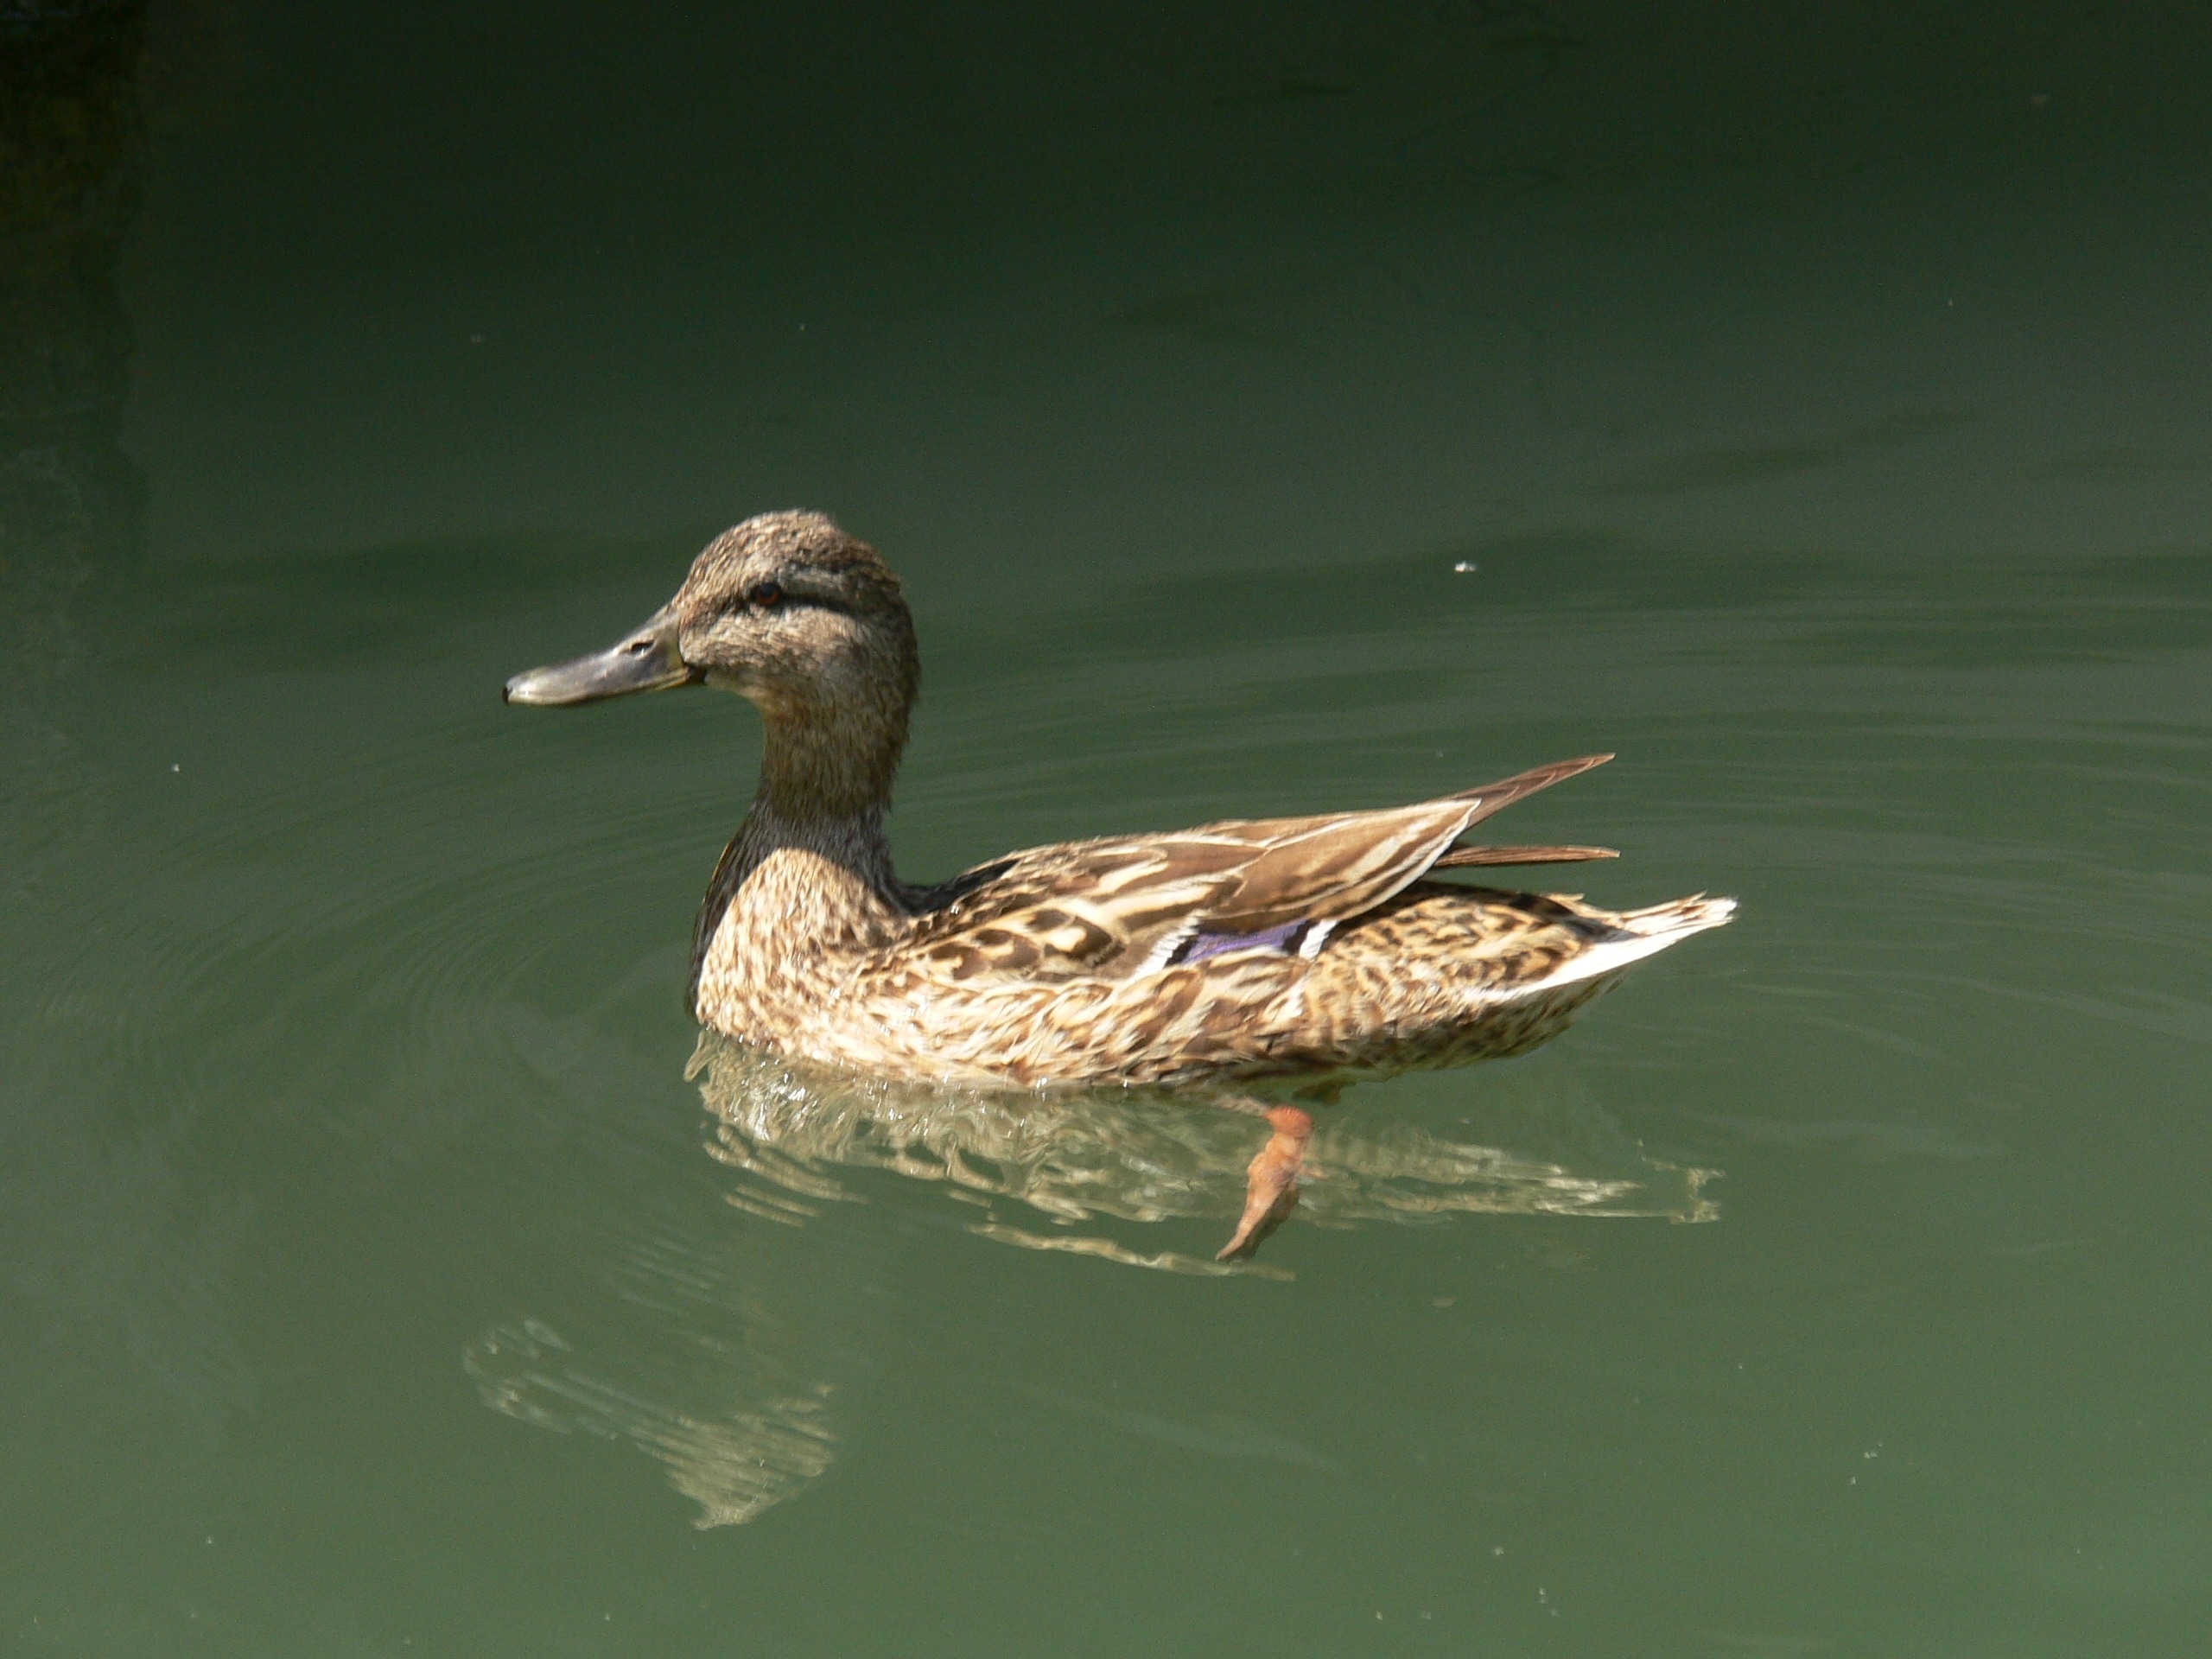 brown and white duck